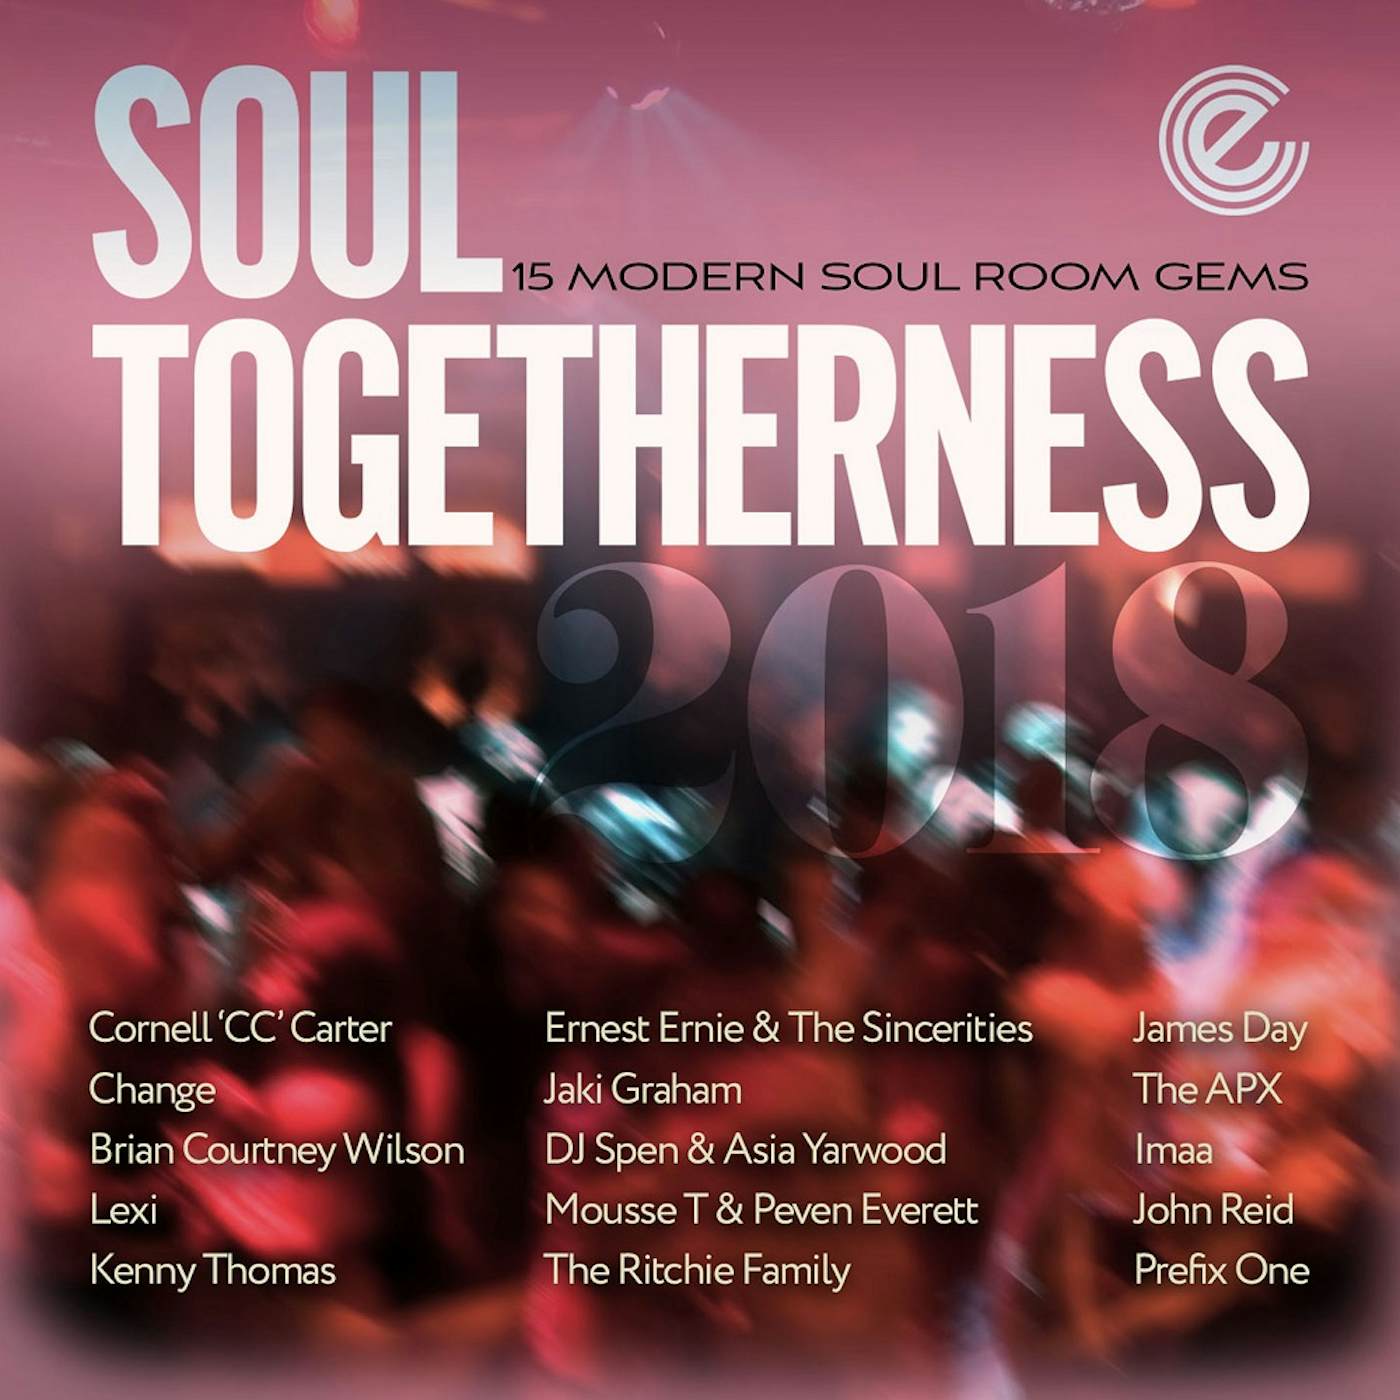 SOUL TOGETHERNESS 2018 / VARIOUS Vinyl Record